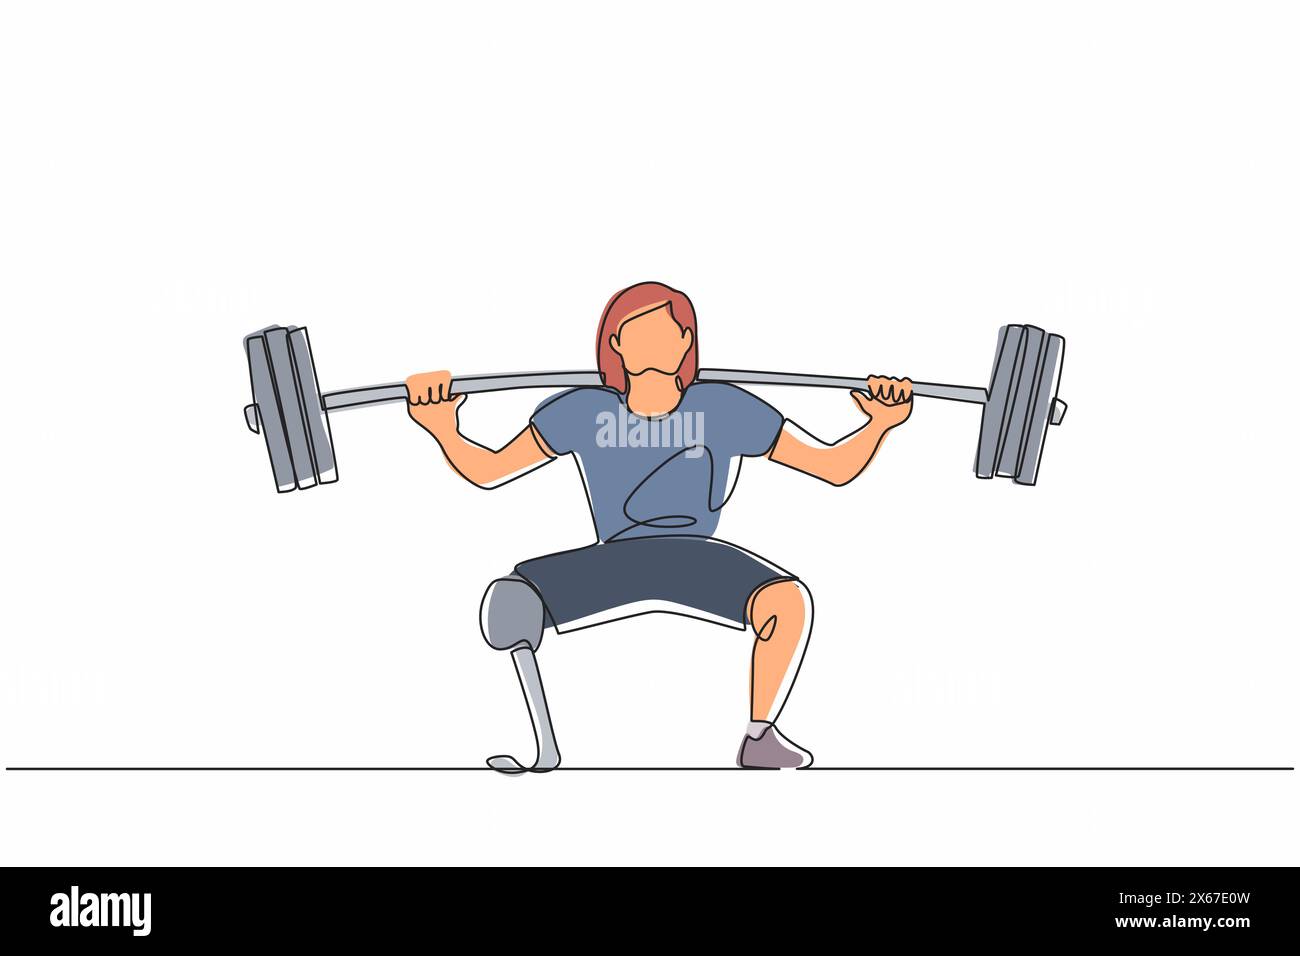 Single one line drawing disabled female weightlifter with amputated legs. Athletic weightlifting workout with barbell muscles sport strongwoman beauti Stock Vector